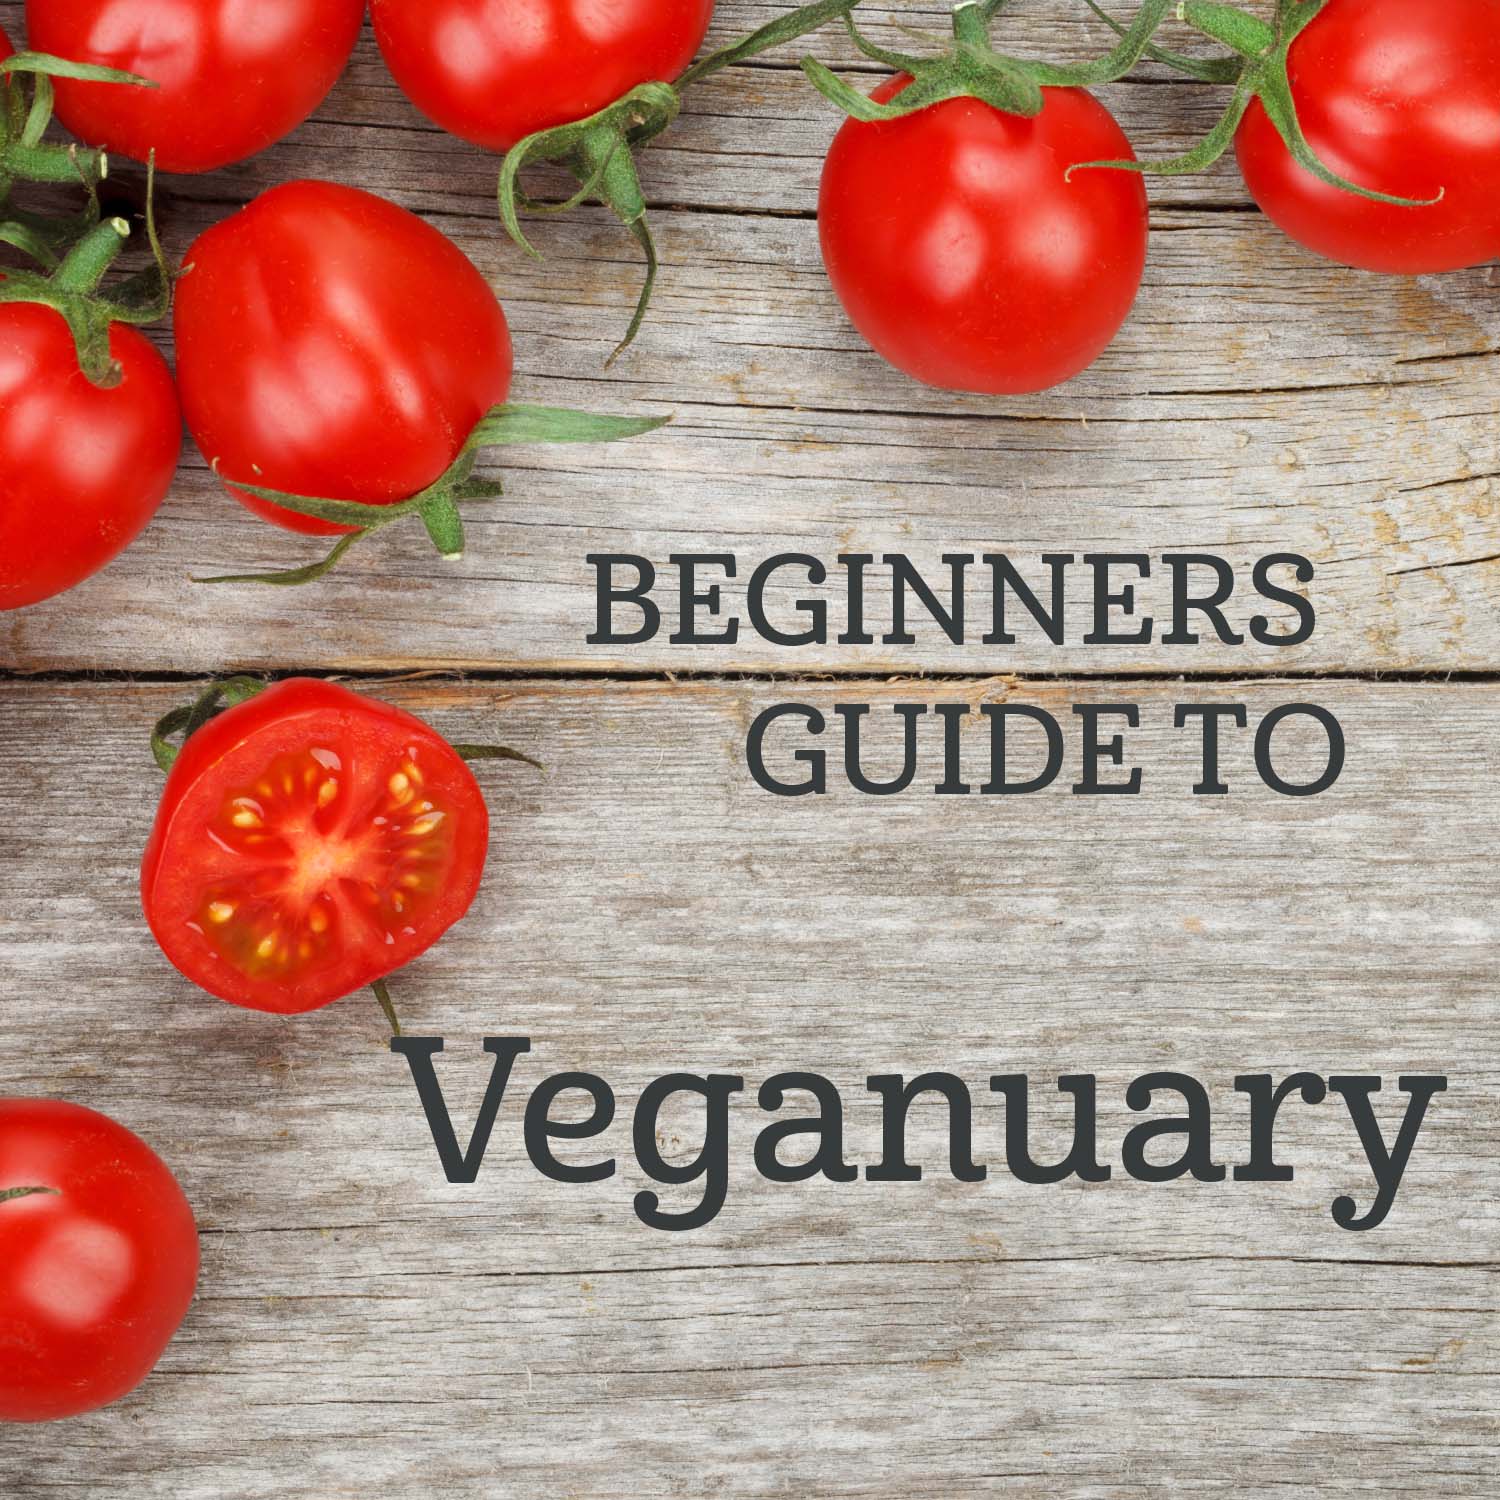 A beginners guide to Veganuary